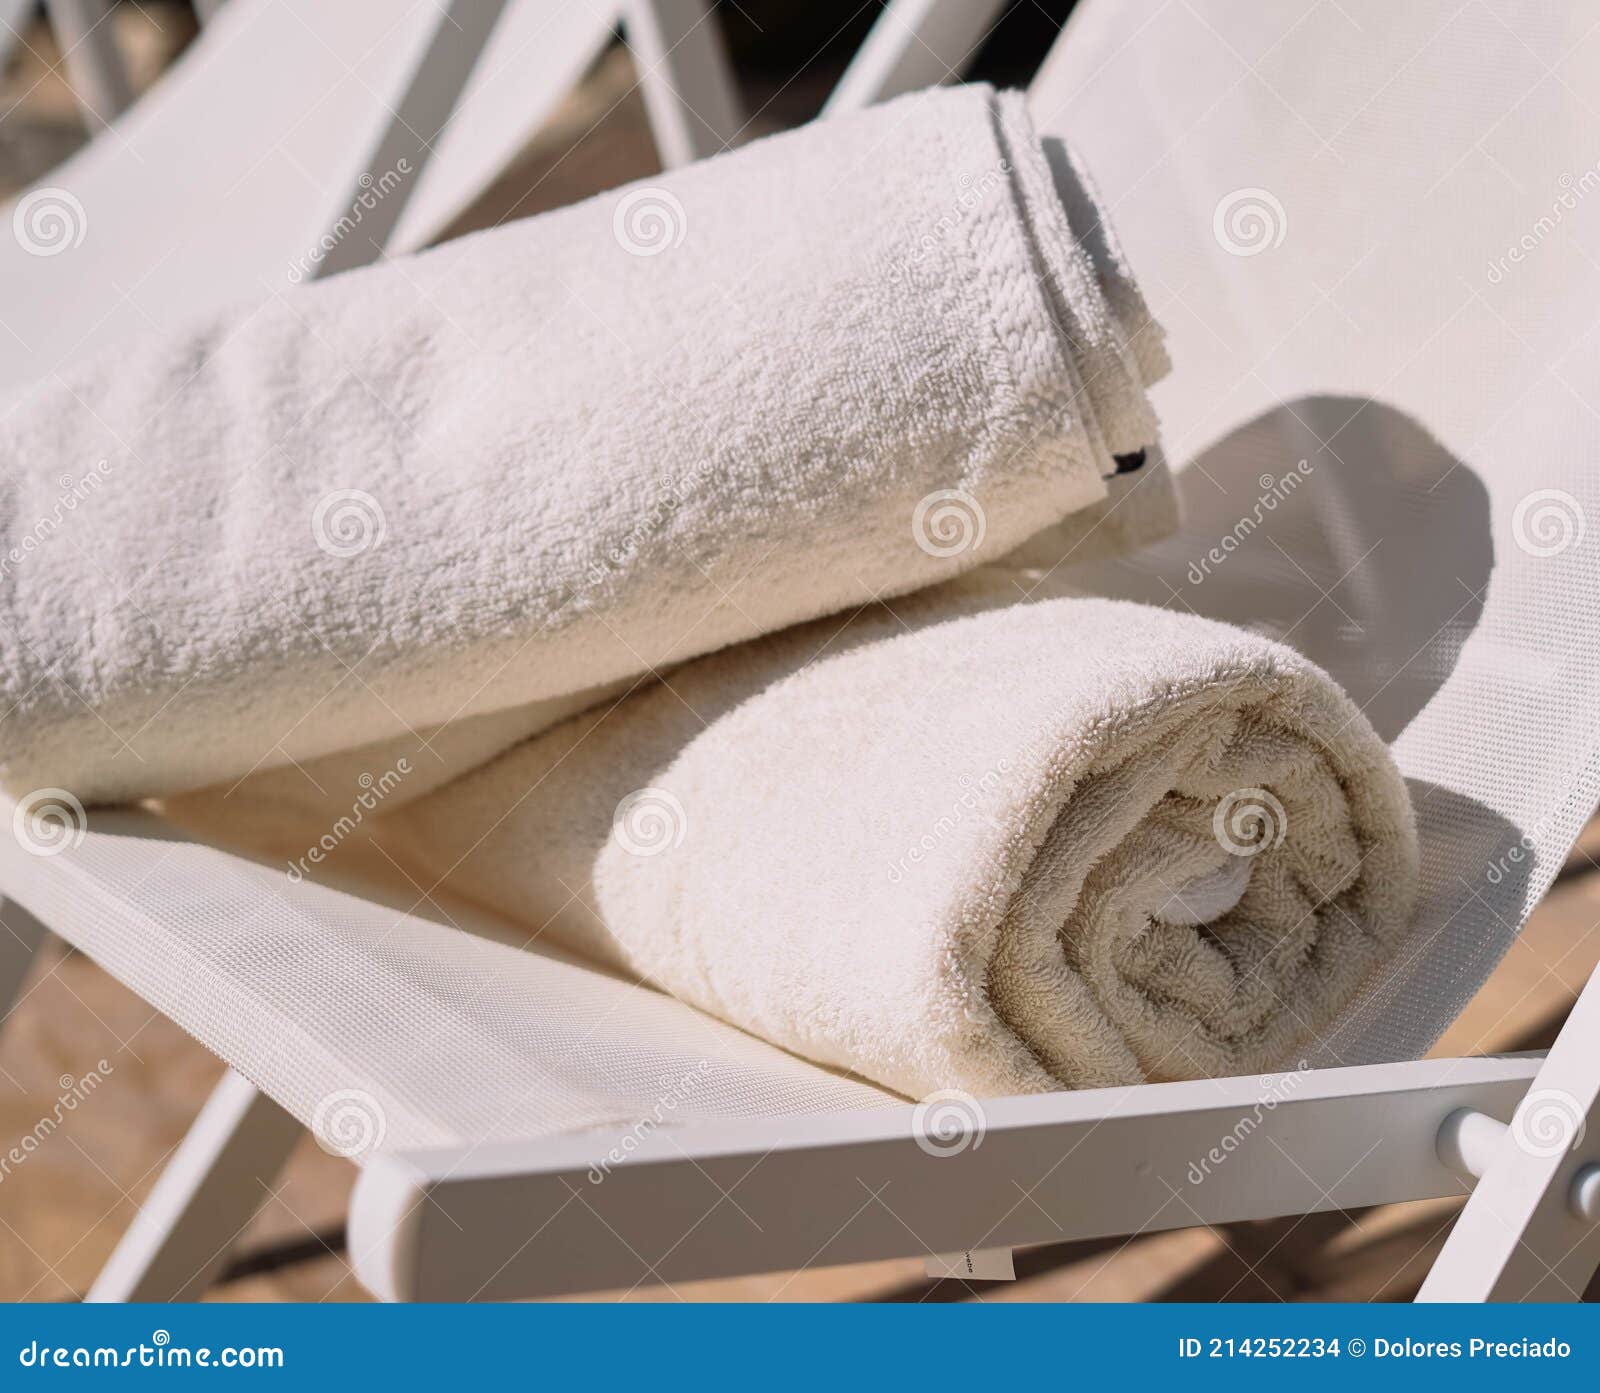 hotel pool chair with folded towels